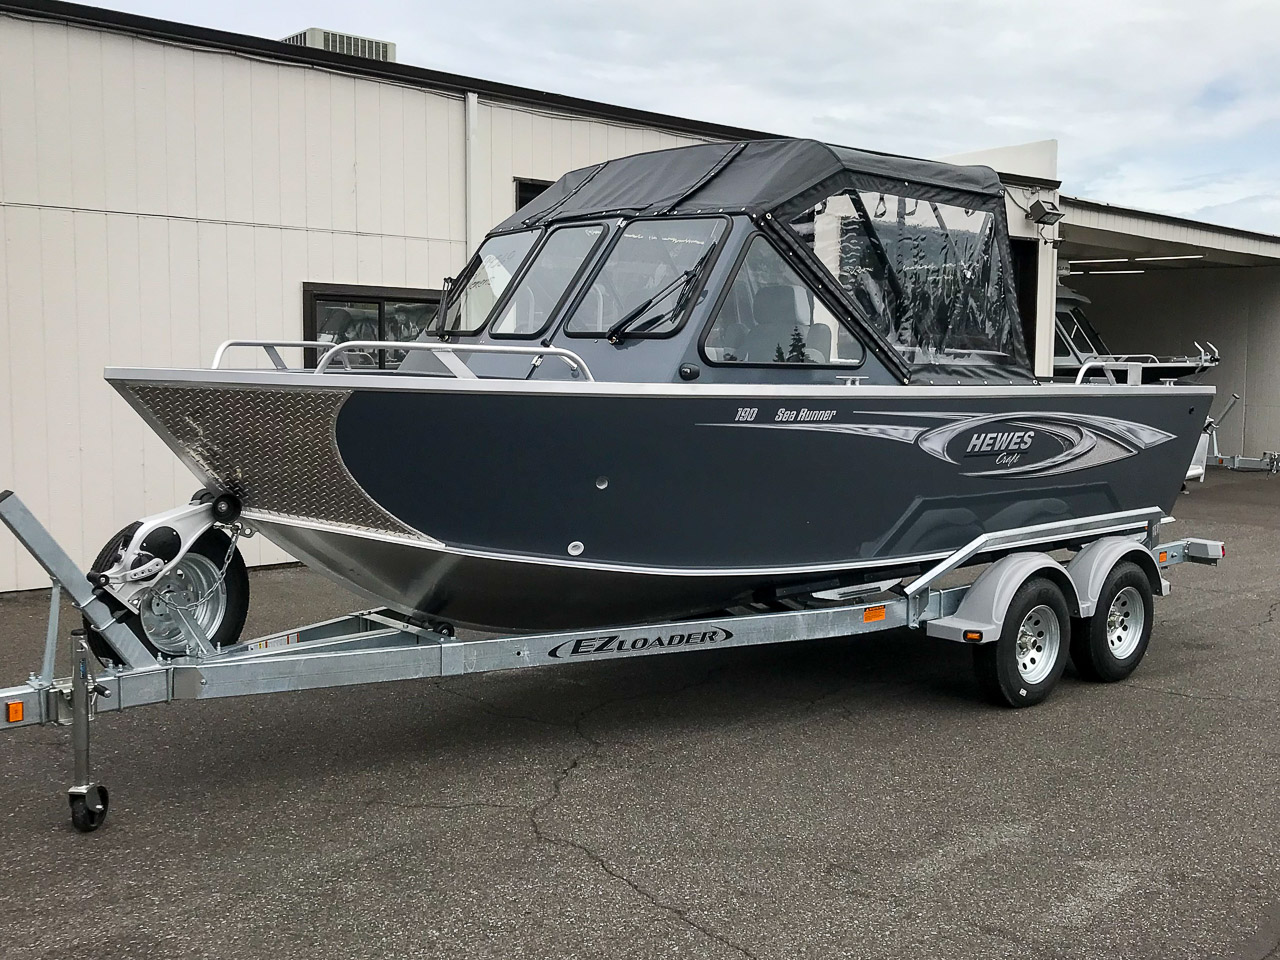 2020 Hewescraft 19 SEA RUNNER | 2020 Boat in Gladstone OR | 5876067899 ...